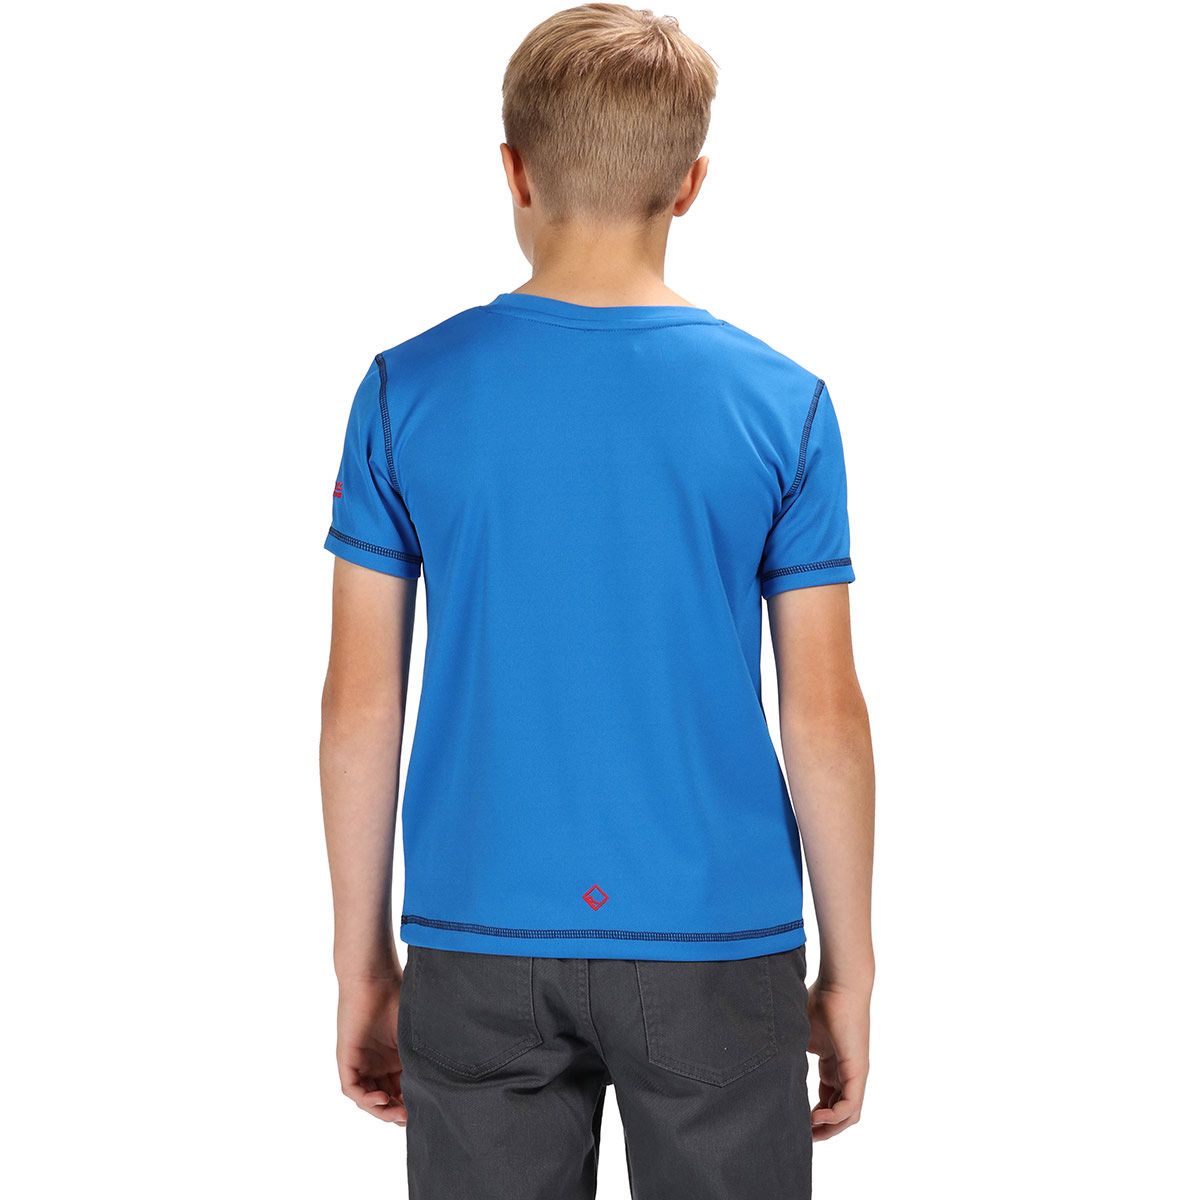 100% quick dry polyester pique fabric. UV Protection (UPF) of 40+. Good wicking performance.